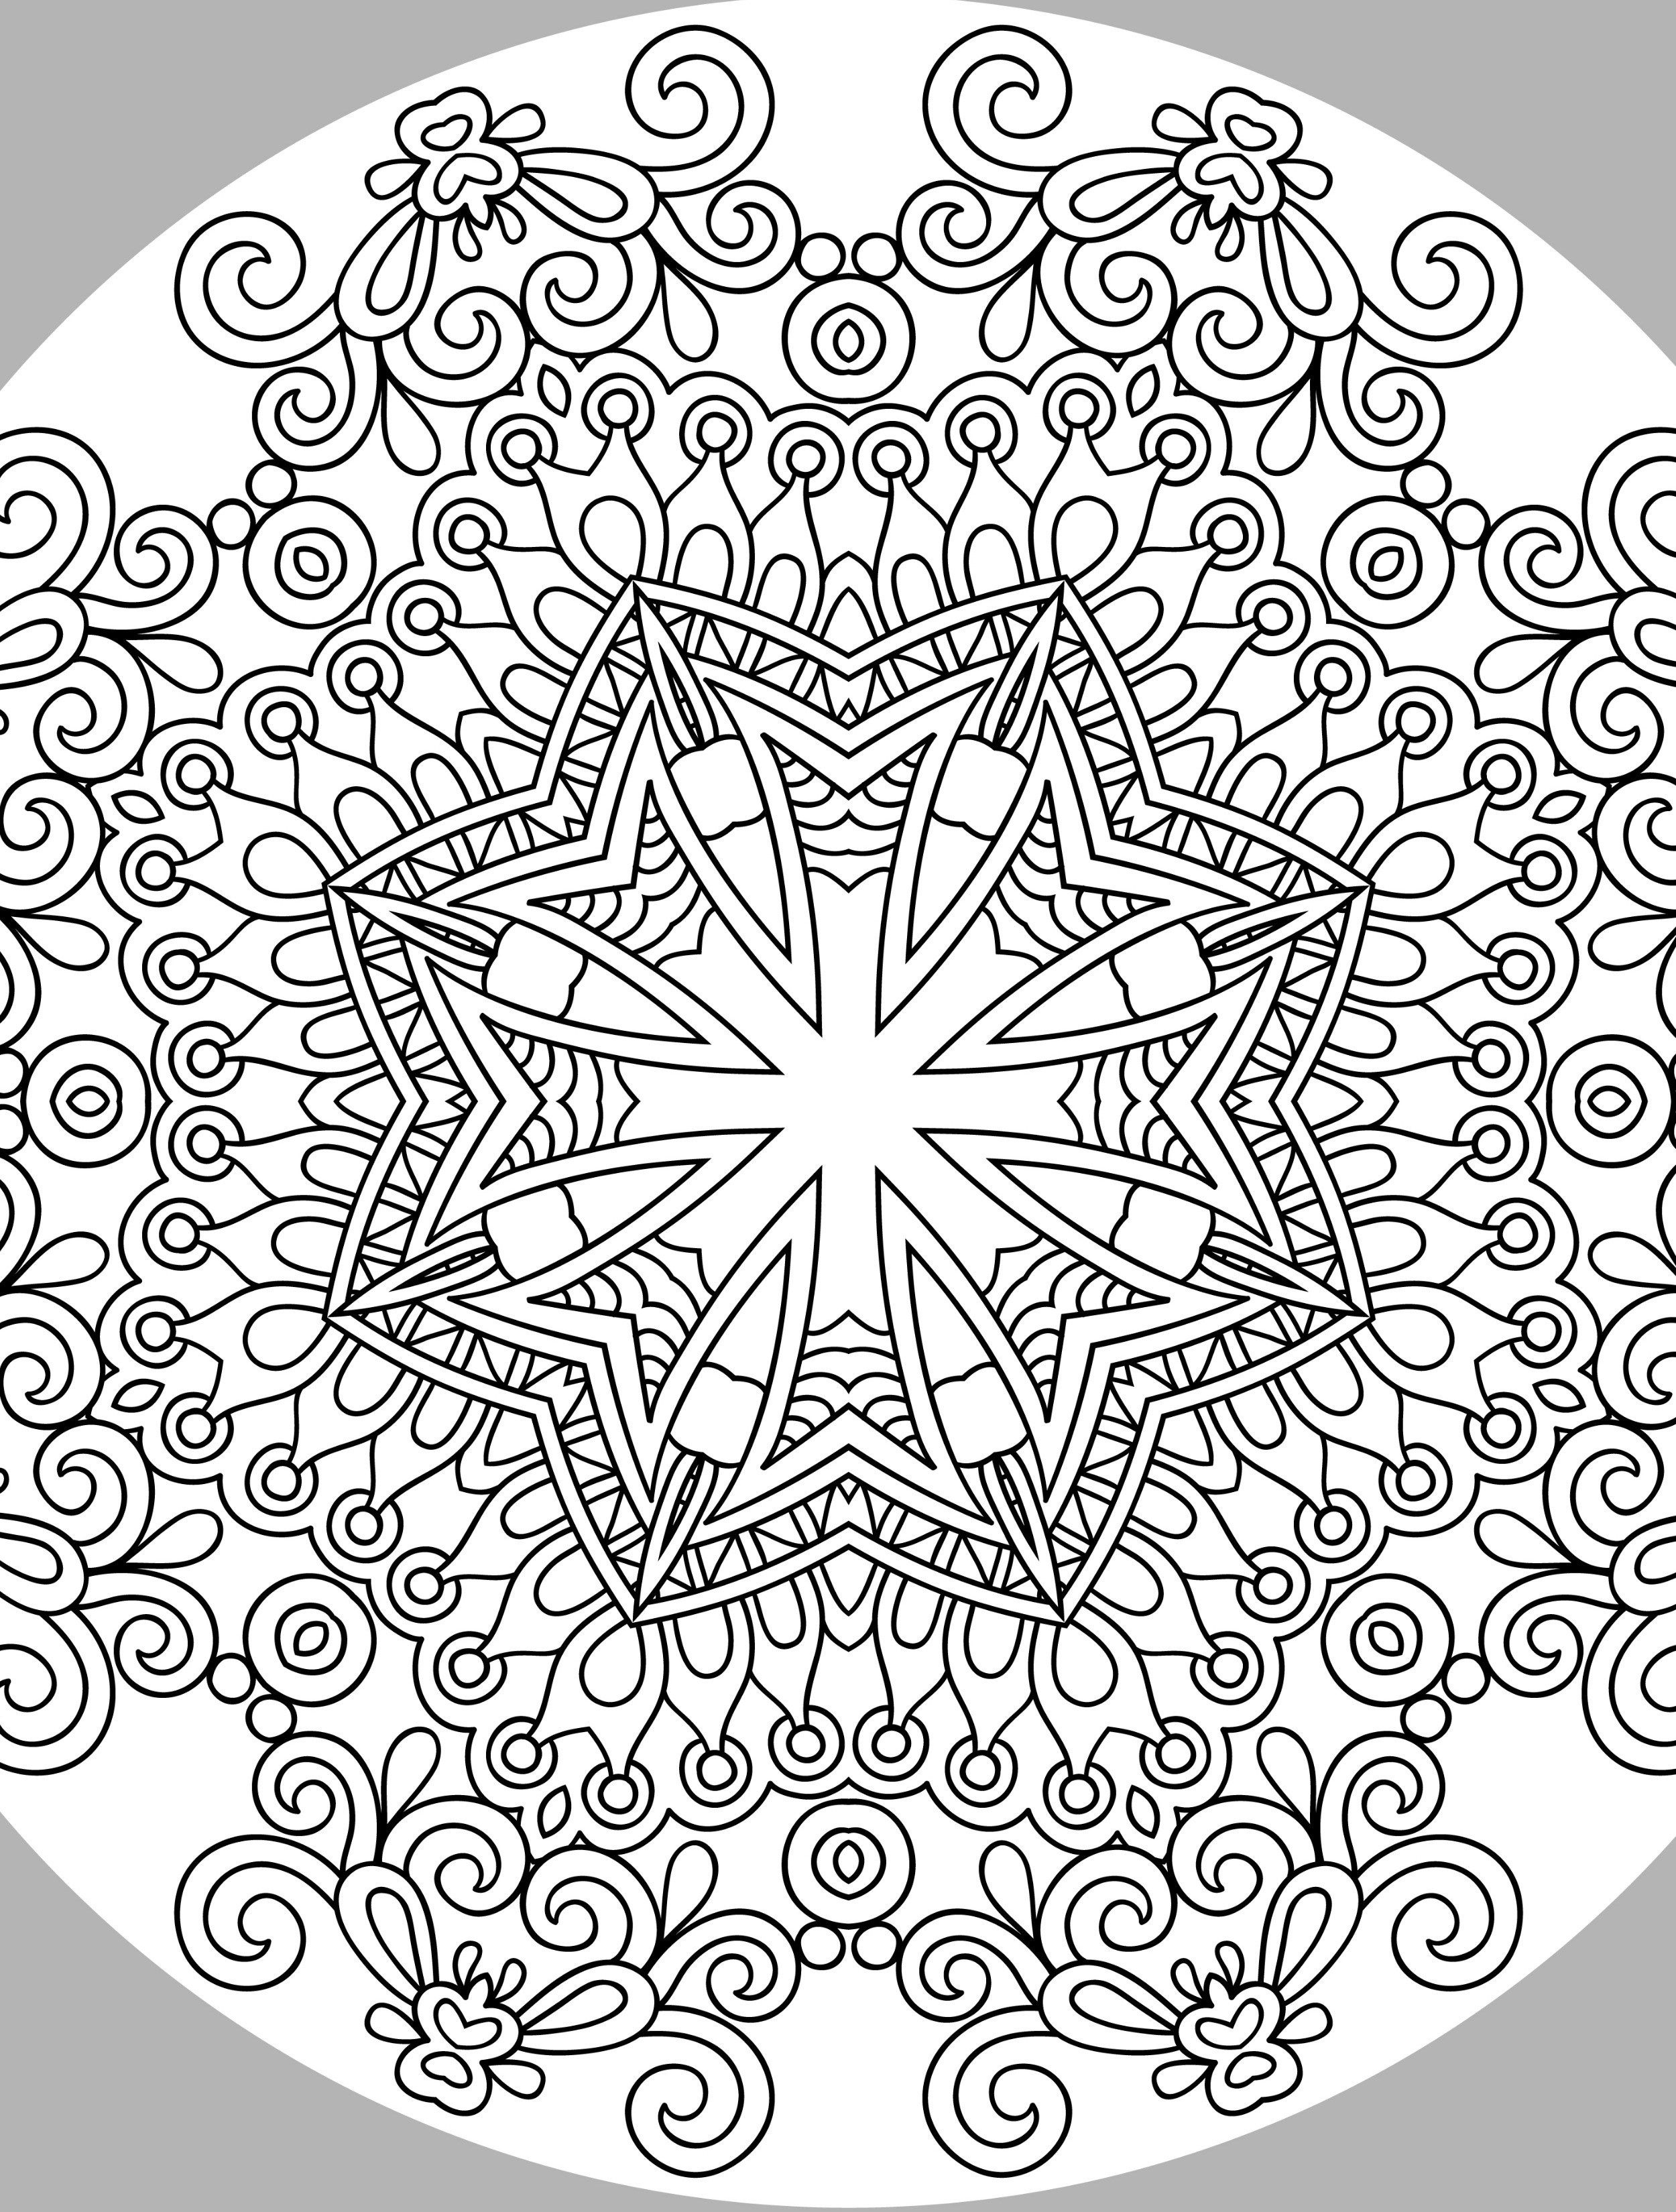 10 Free Printable Holiday Adult Coloring Pages | Coloring | Adult - Free Printable Holiday Coloring Pages